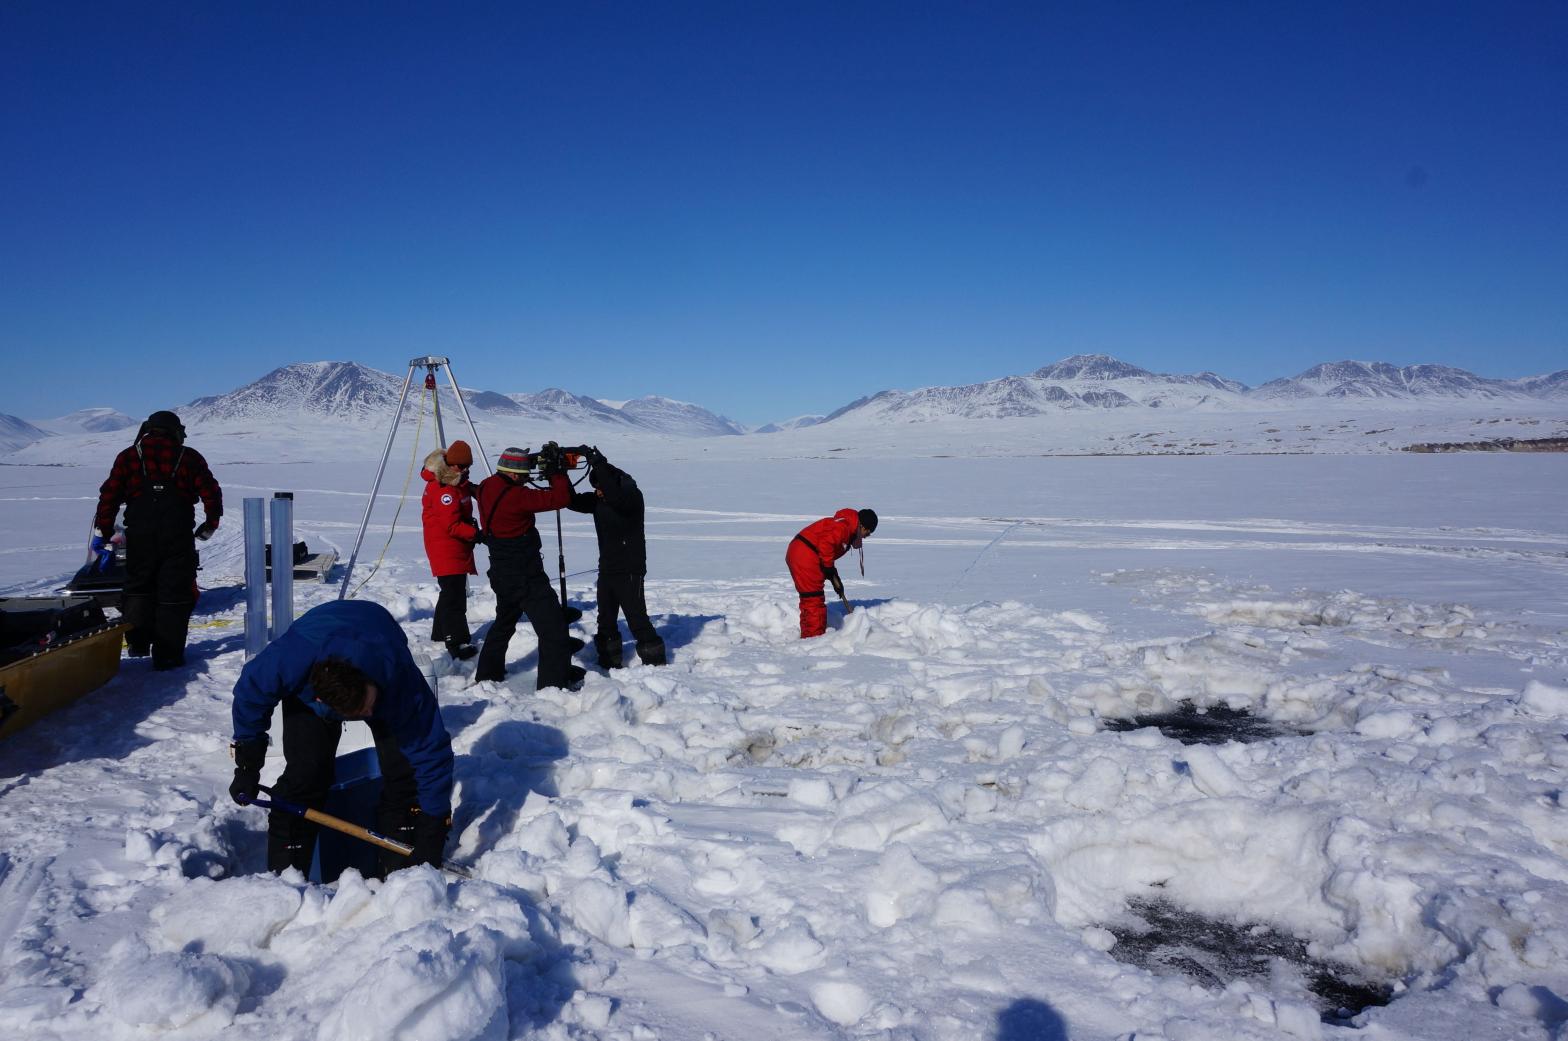 Graham Colby, one of the study scientists, took this photo of researchers drilling into Lake Hazen's ice to collect sediment samples in 2017. (Photo: Graham Colby, Getty Images)